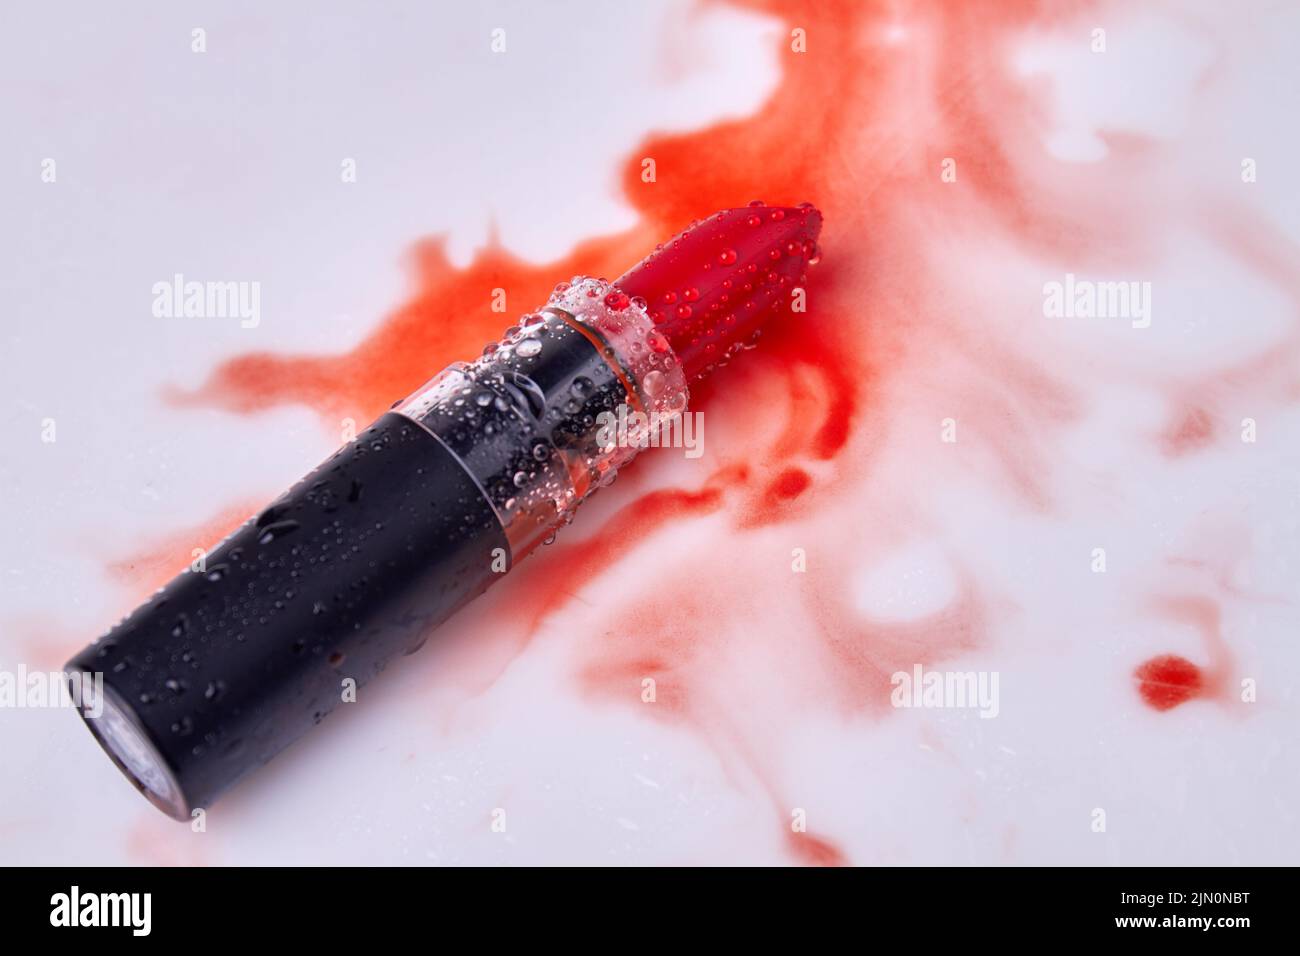 Lipstic with wet stains on white background. Make up cosmetic accessory. Stock Photo